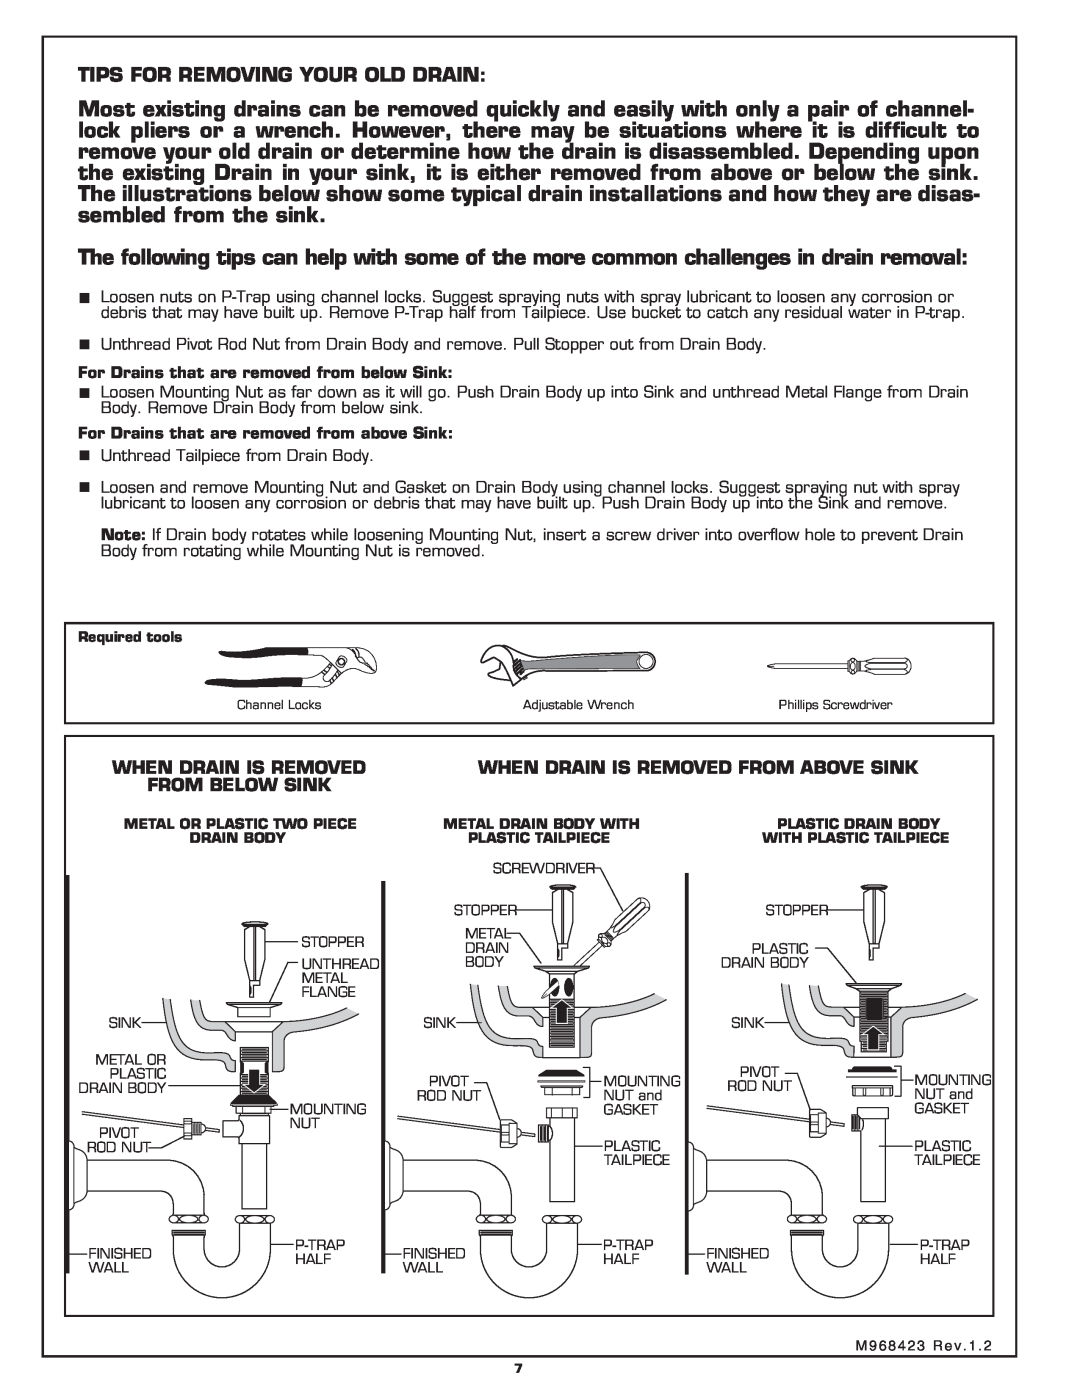 American Standard 2904 Tips For Removing Your Old Drain, When Drain Is Removed From Above Sink, From Below Sink 